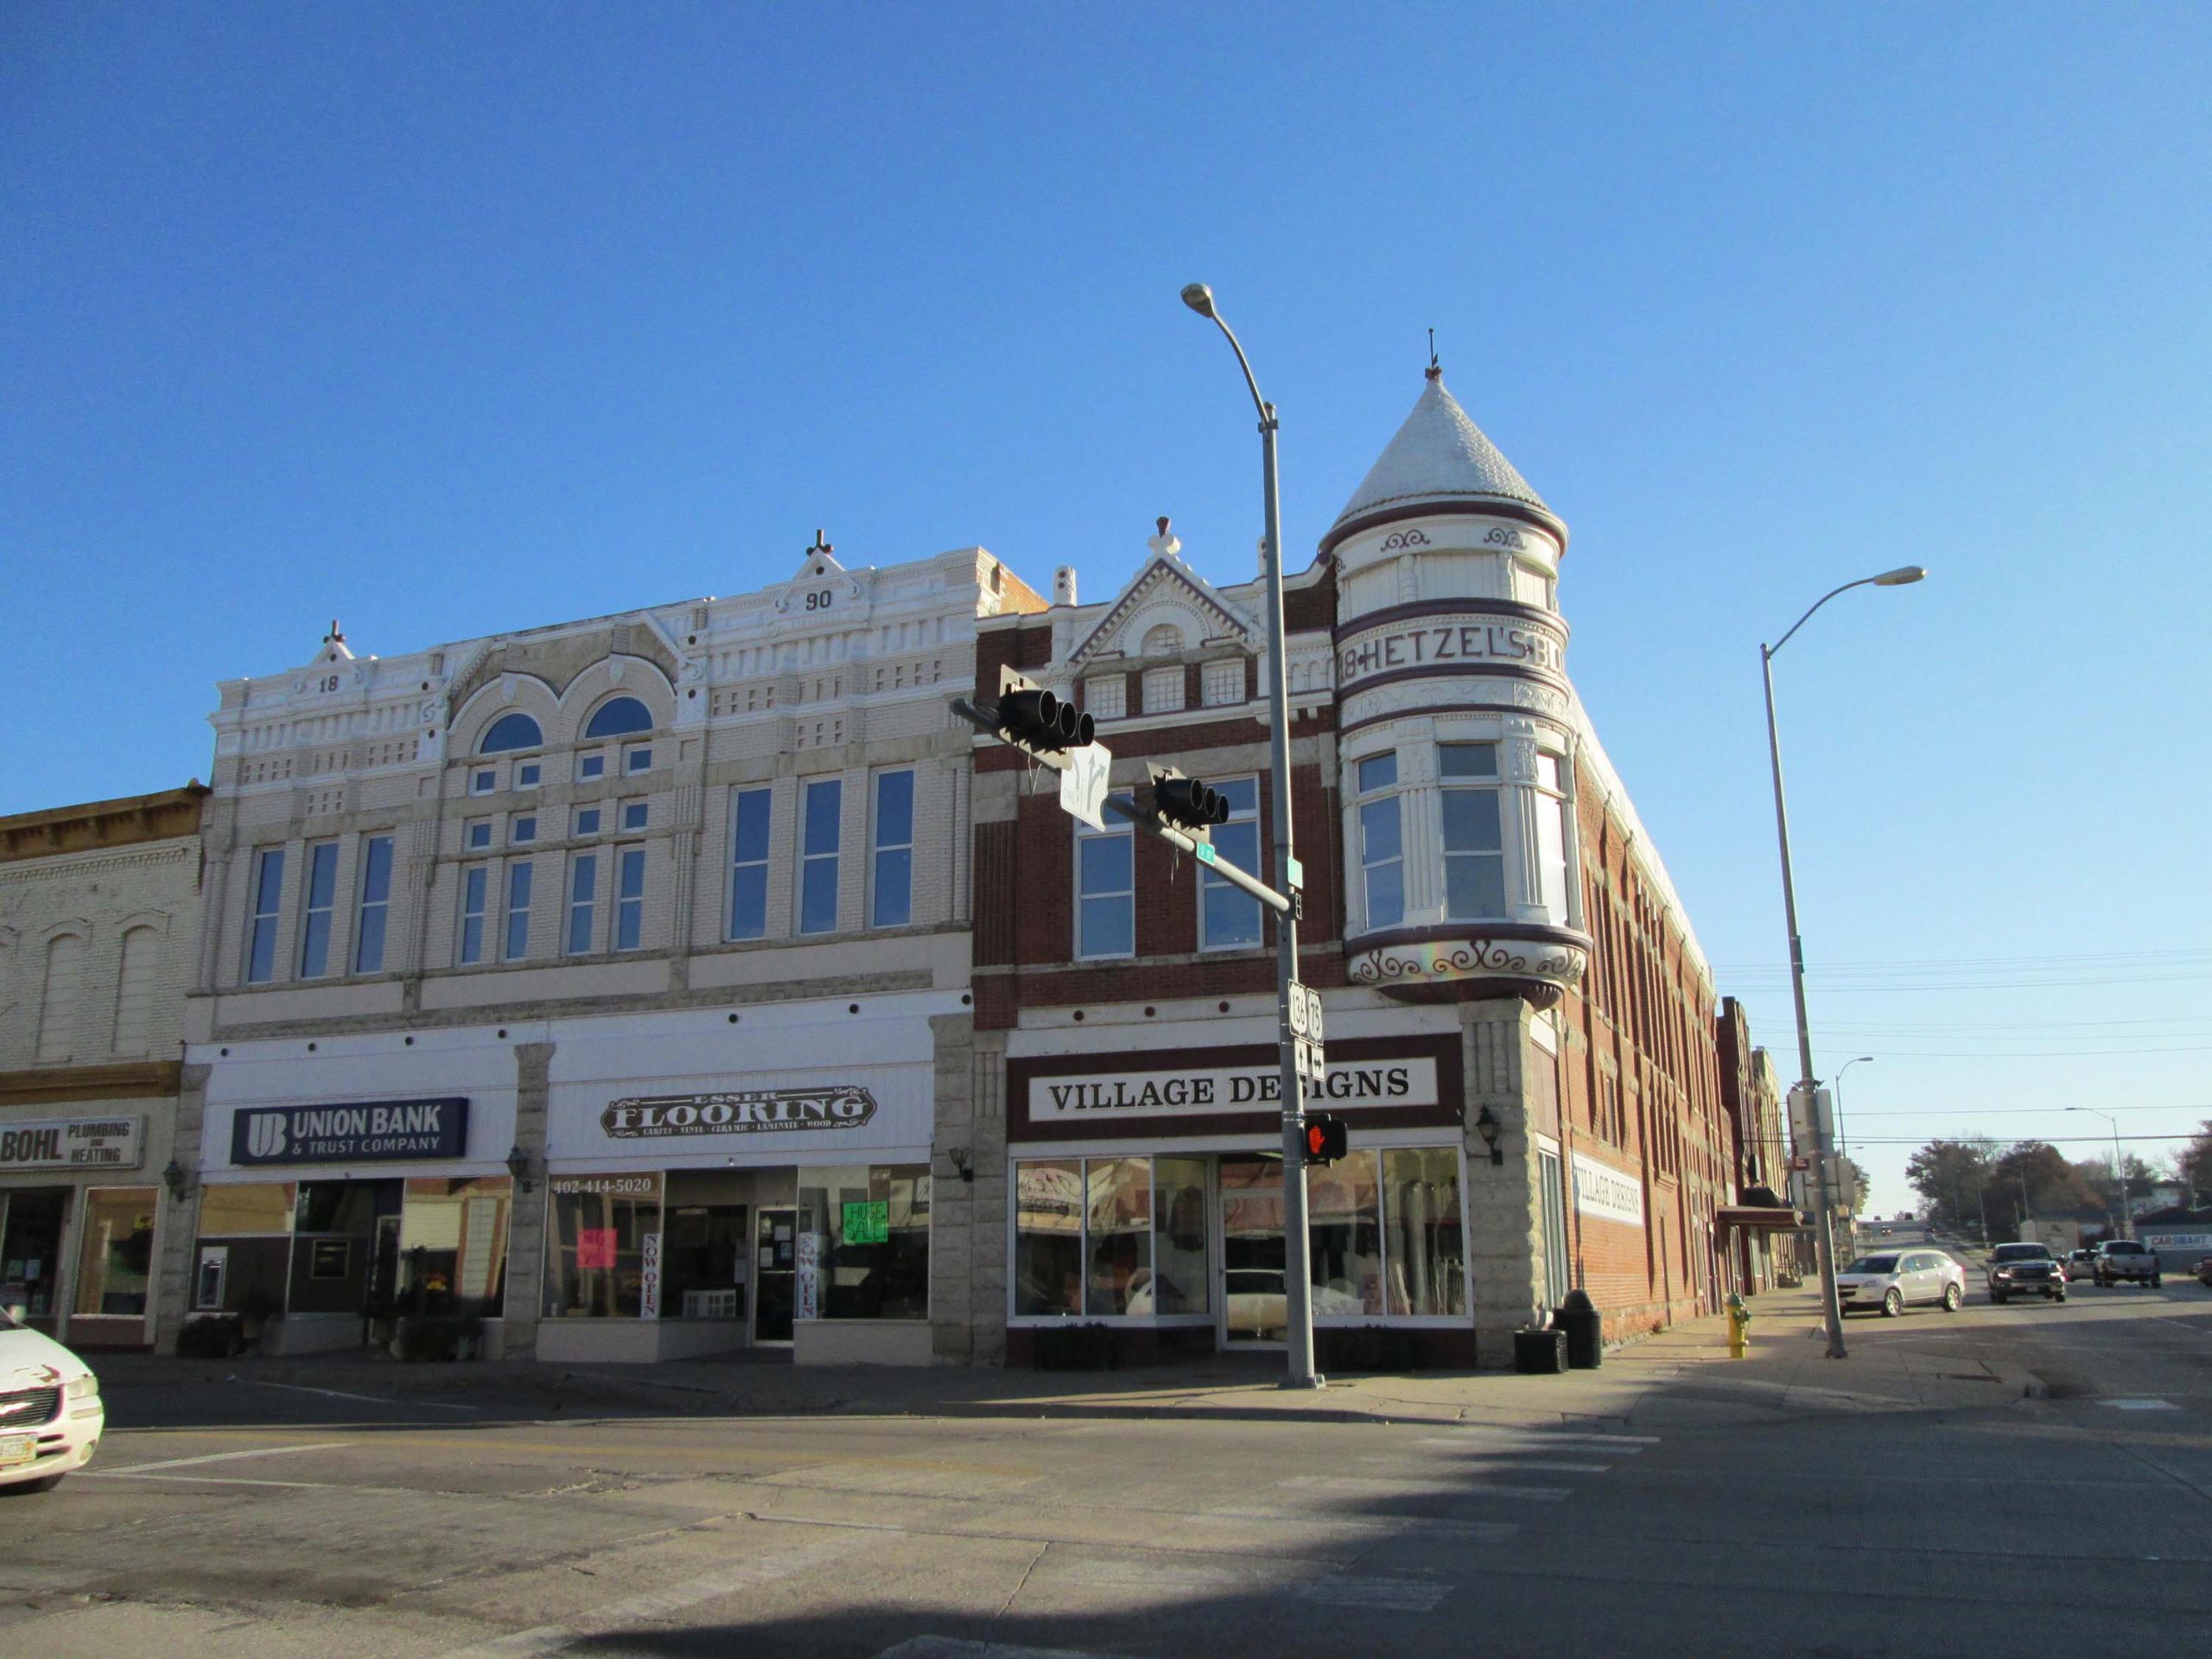 New Opera House, part of Auburn’s local landmark district and listed on the National Register of Historic Places in 1988